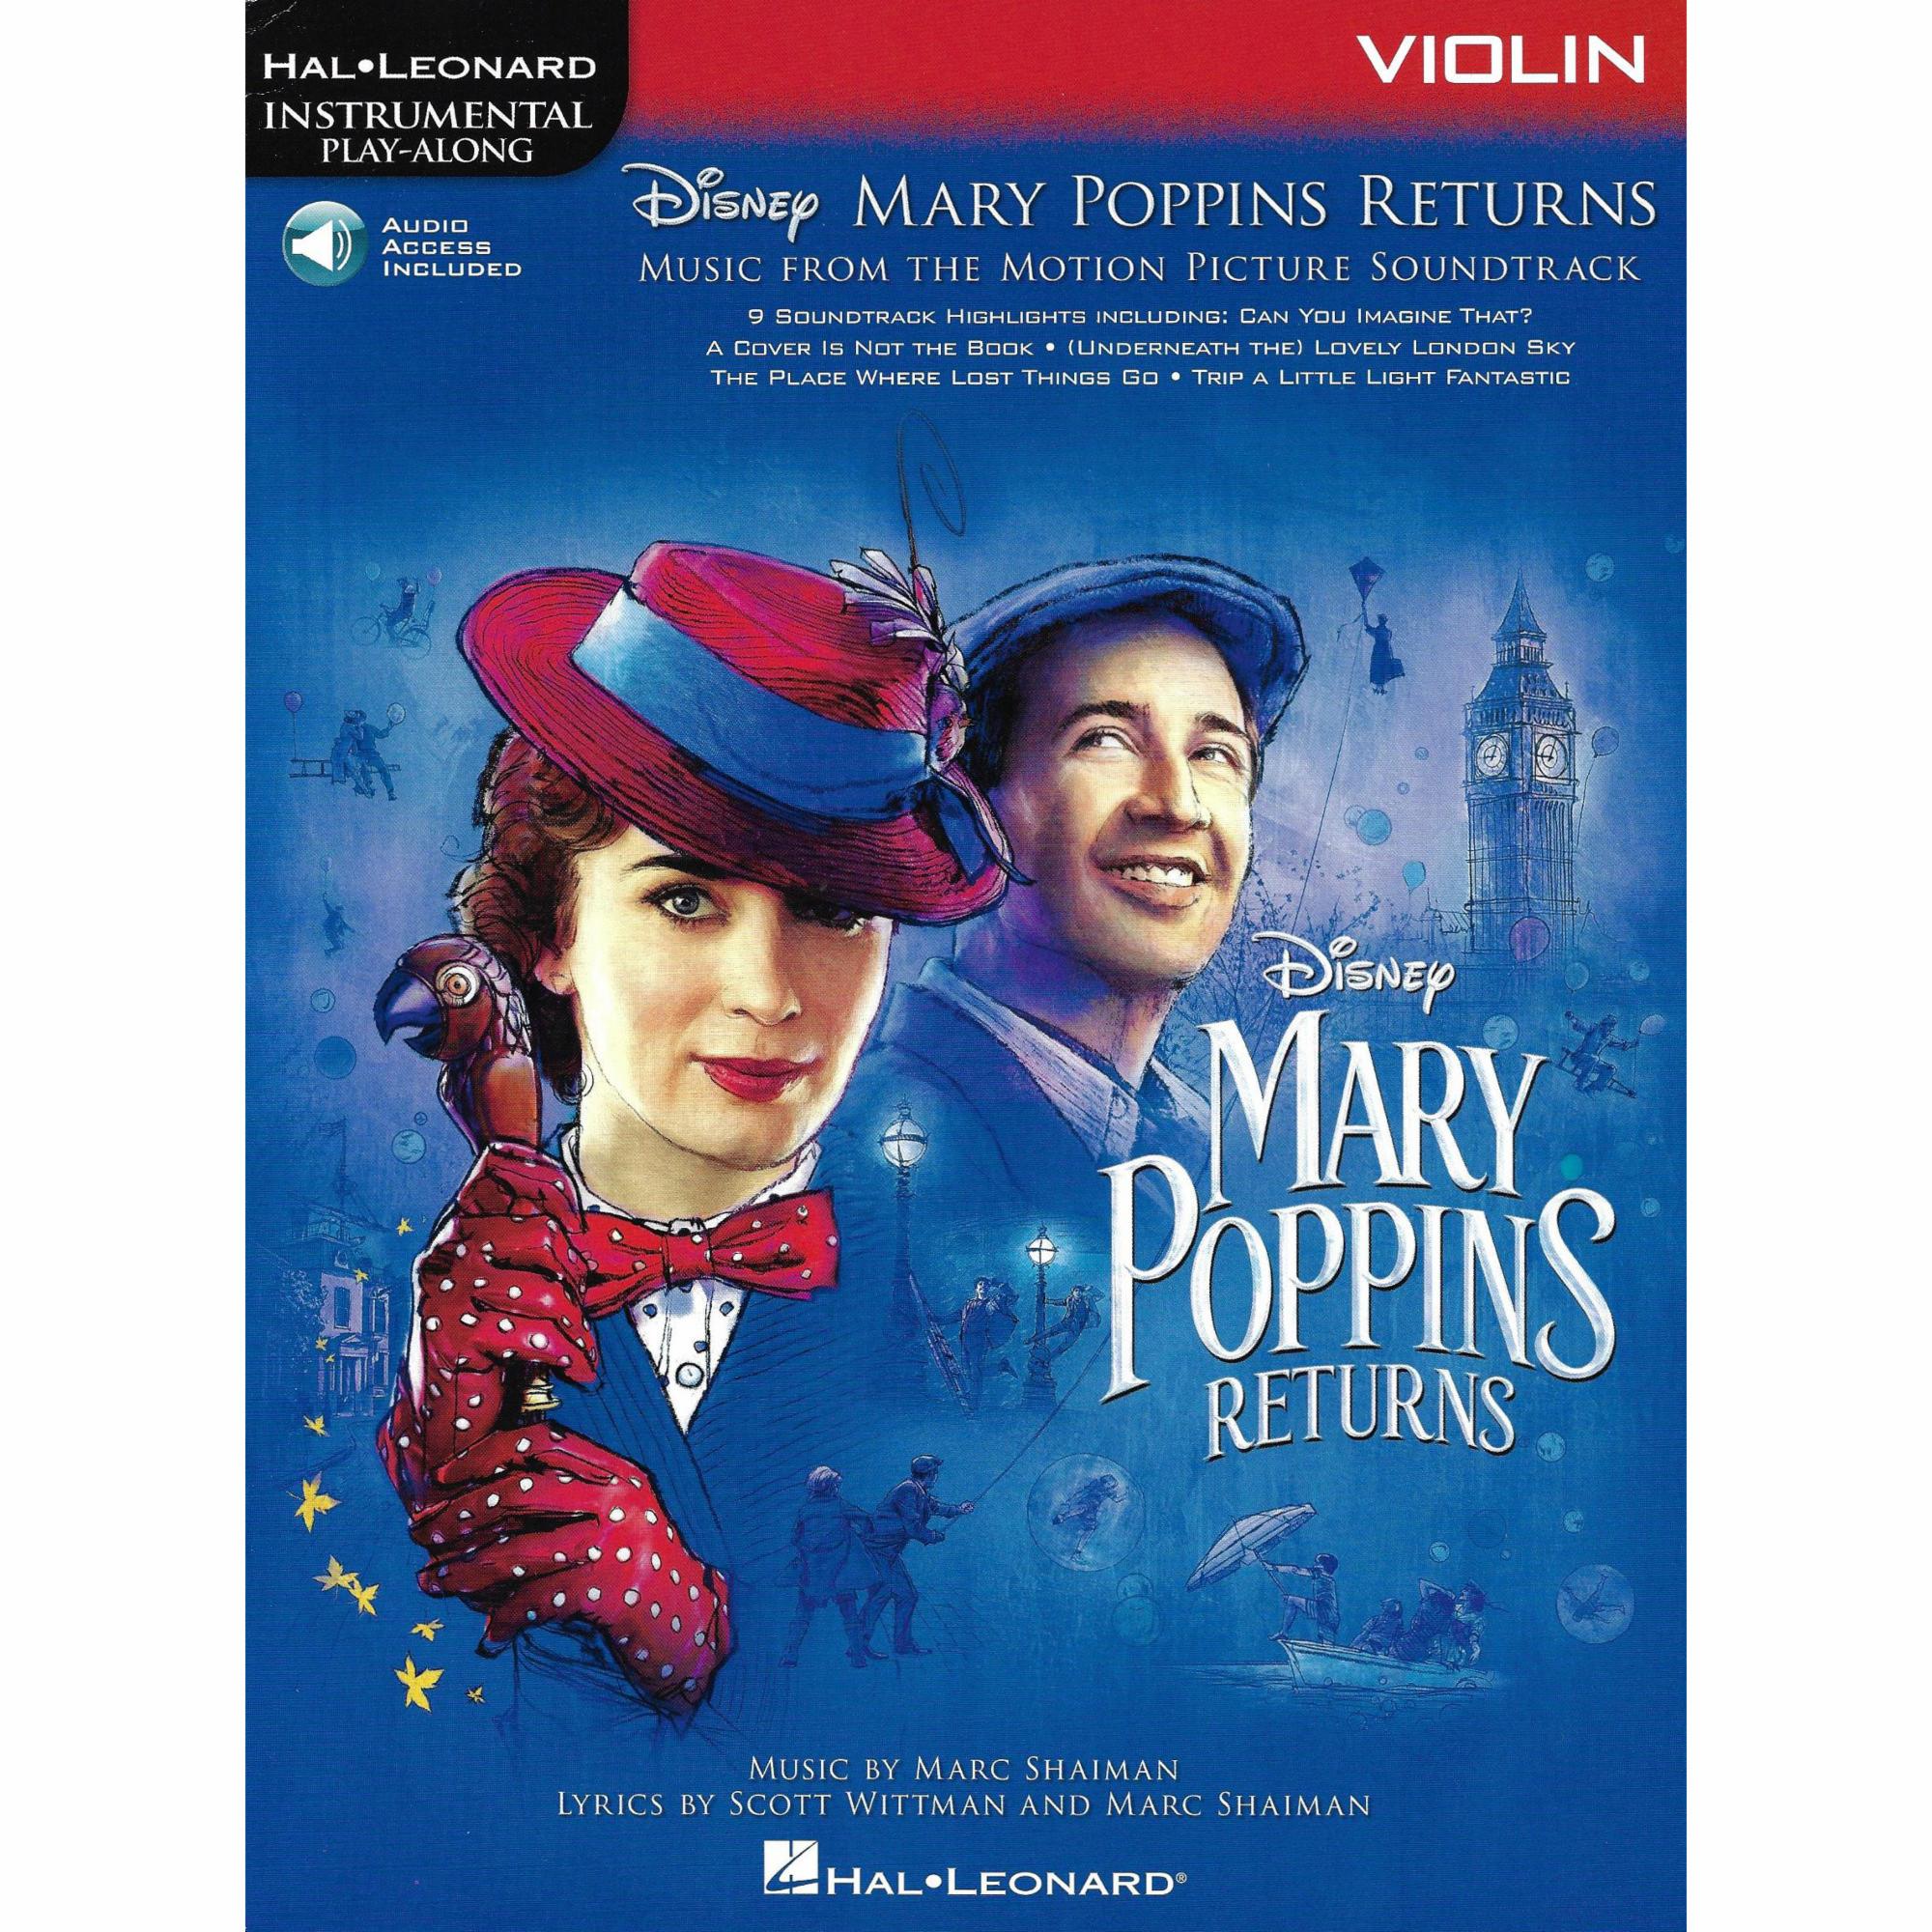 Mary Poppins Returns for Violin, Viola, or Cello